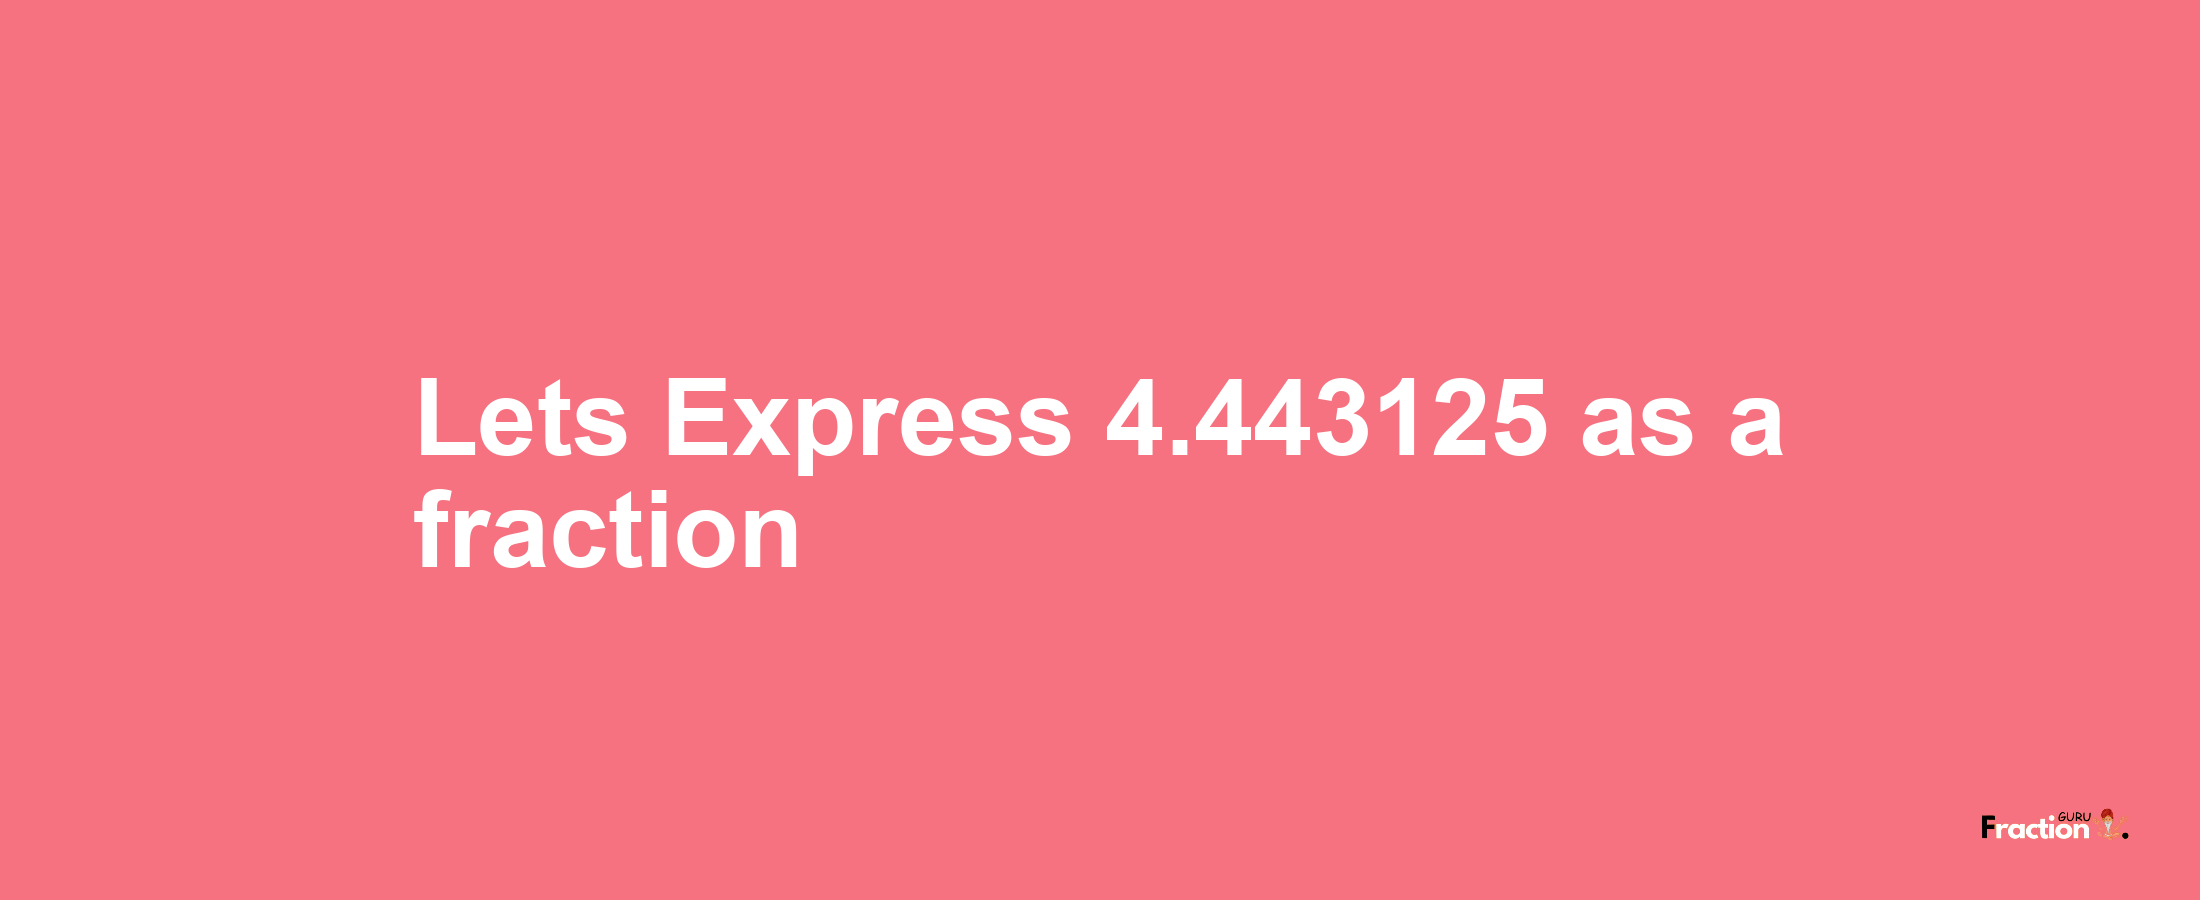 Lets Express 4.443125 as afraction